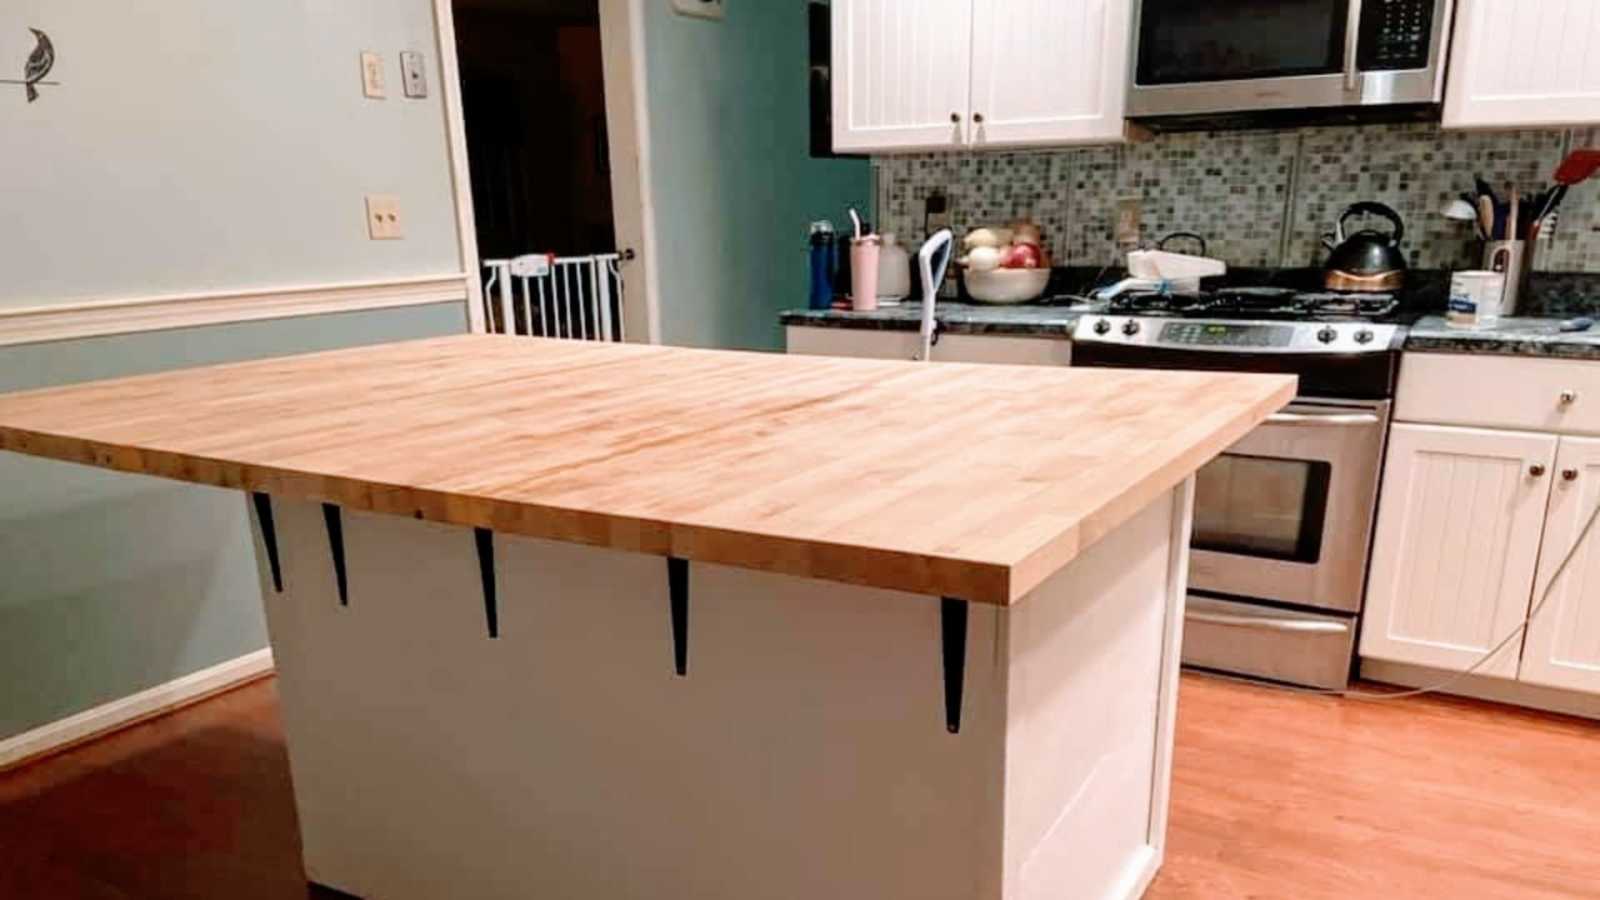 An empty kitchen with a large butcherblock island